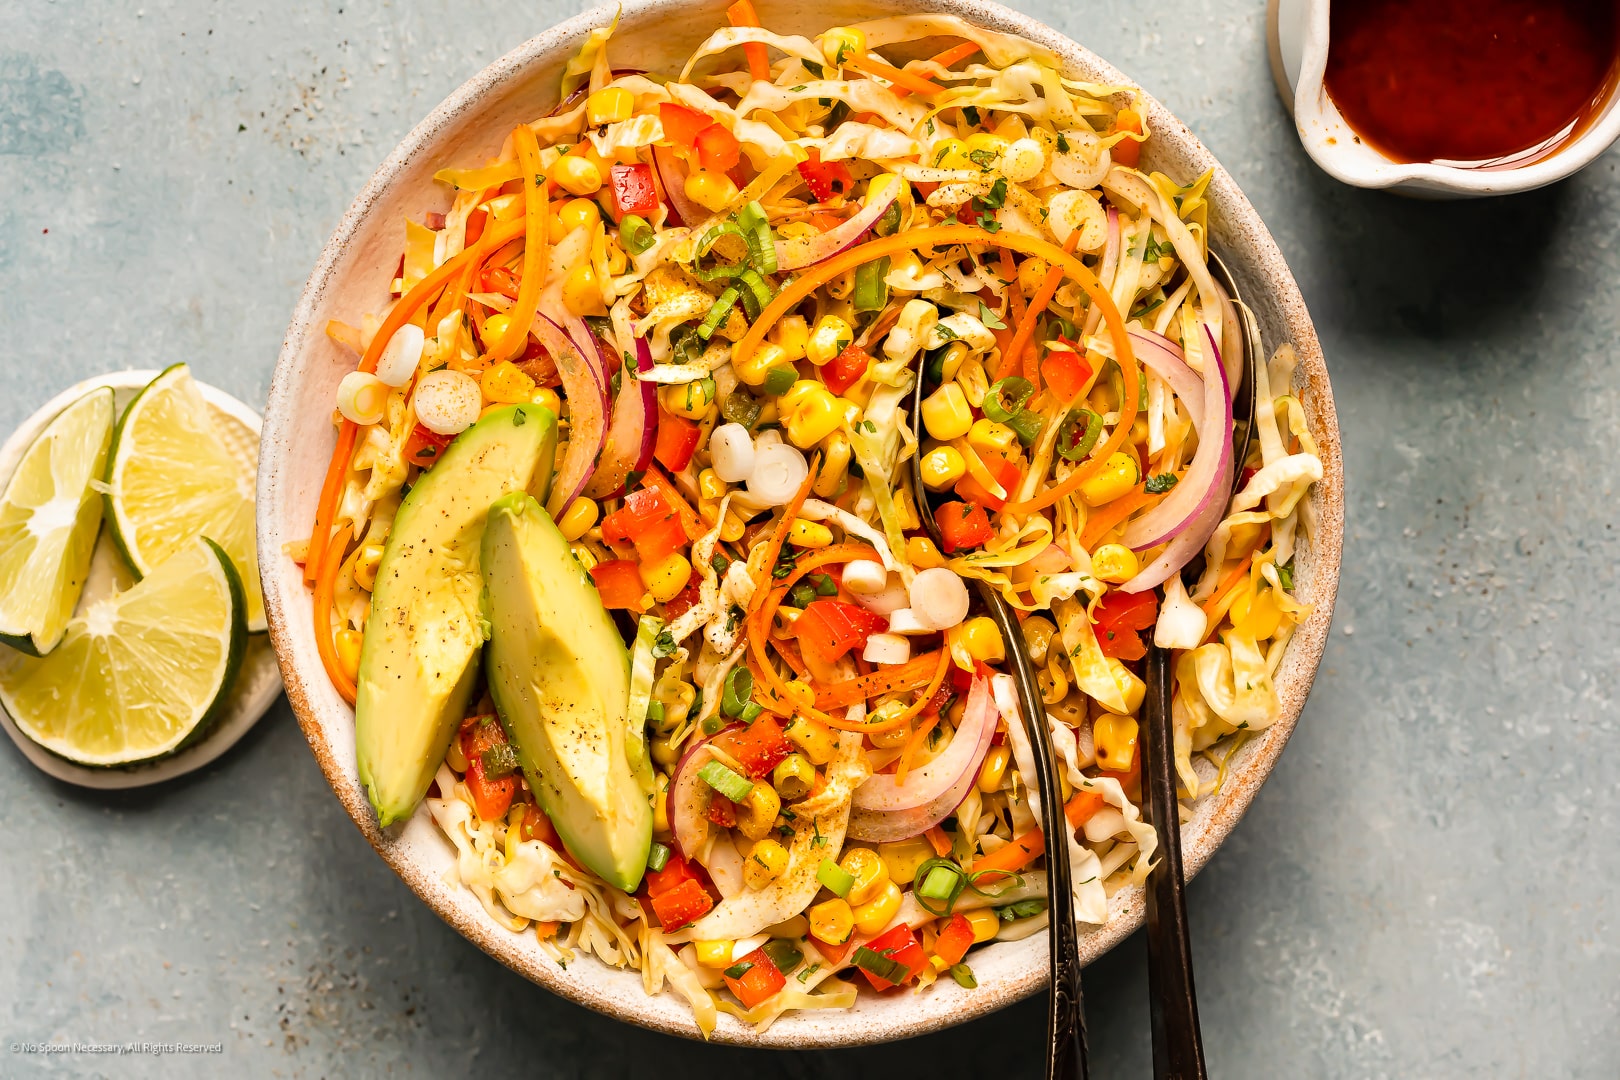 Cilantro Lime Cabbage Salad ⋆ Easy Mexican-Inspired Slaw Salad!